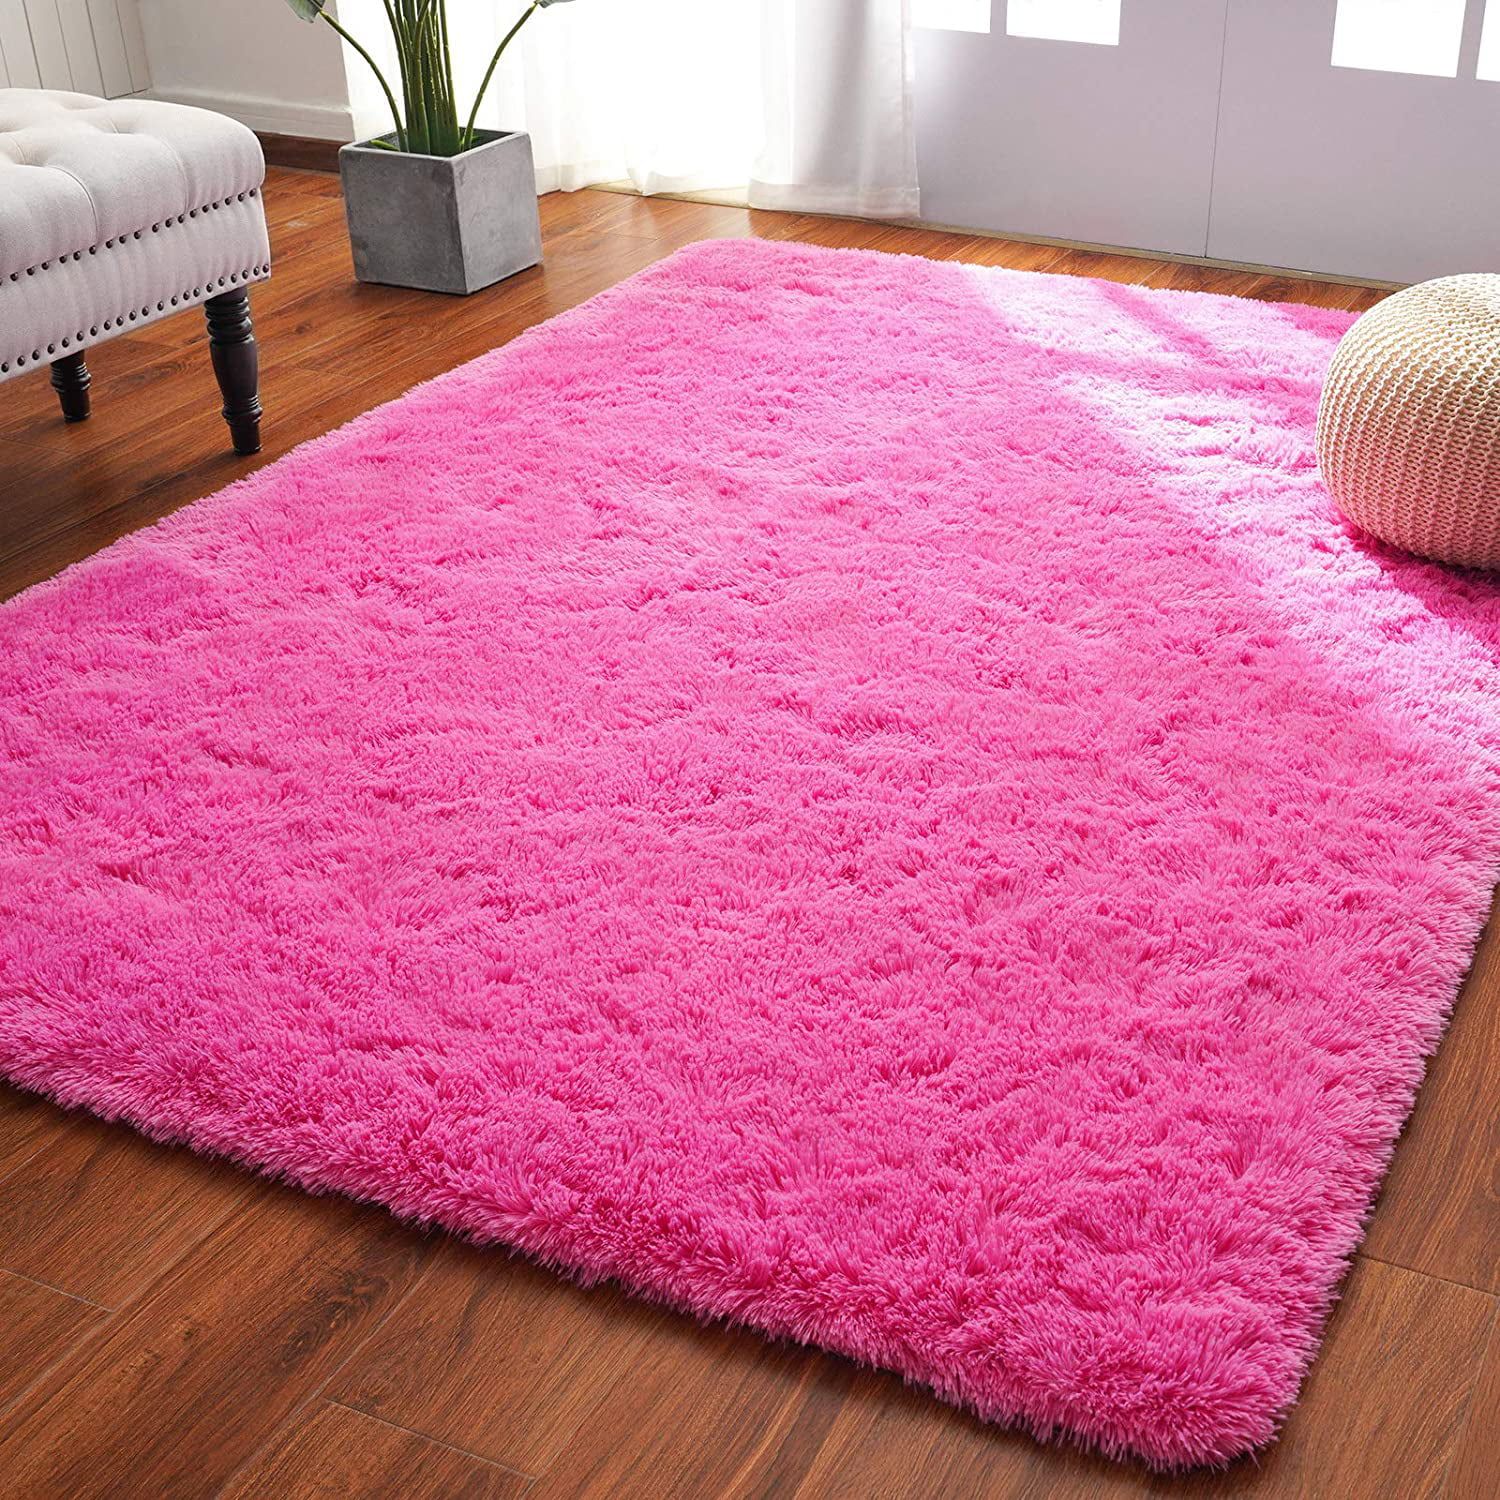 Arogan Super Soft Fluffy Area Rug For Living Room, Shaggy Carpet For  Bedroom Nursery Room,6'x9',hot Pink – Walmart Intended For Pink Soft Touch Shag Rugs (Photo 3 of 15)